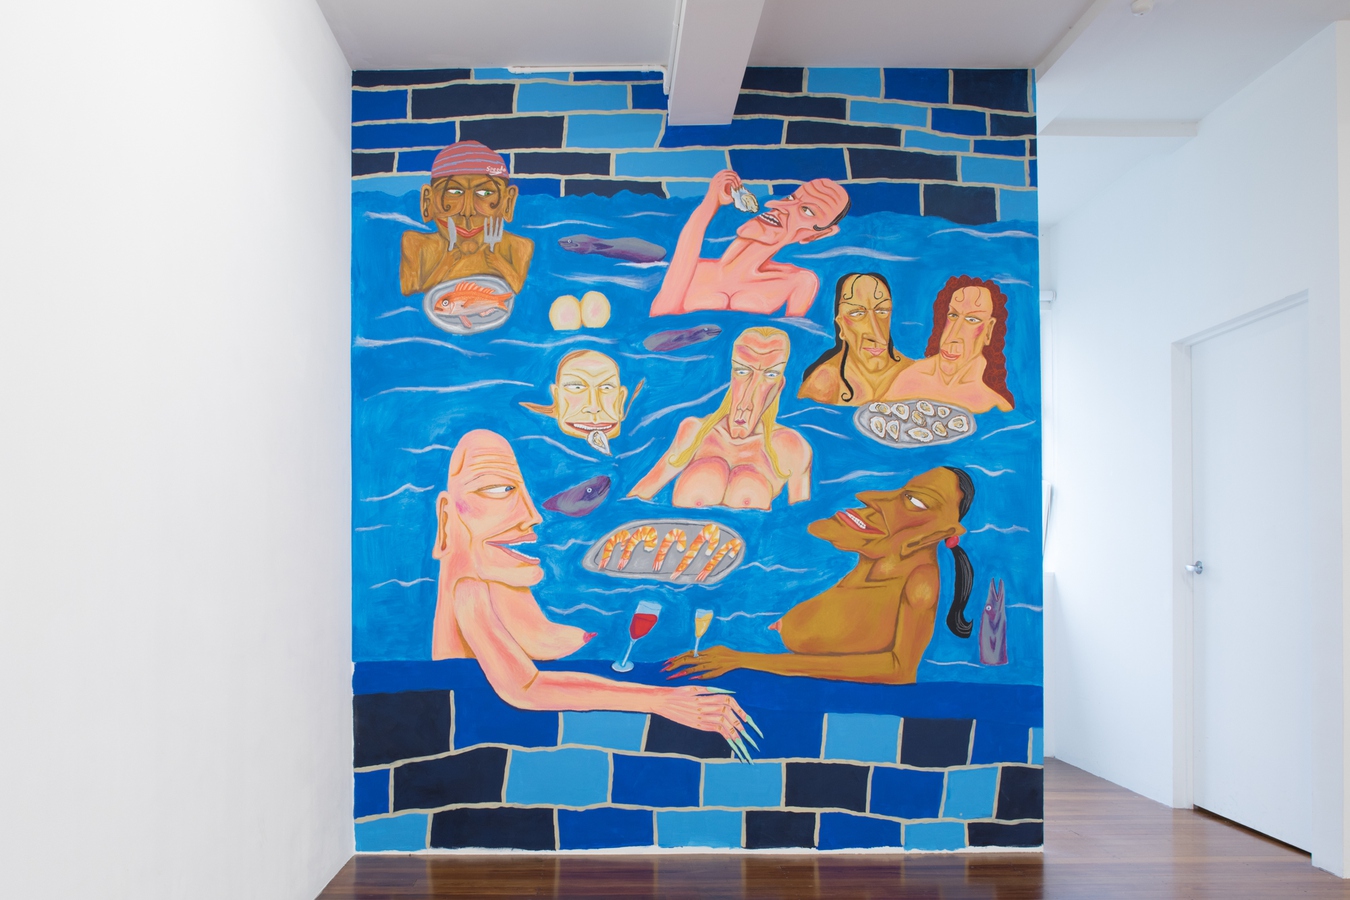 Image: Priscilla Rose Howe, Pool Party (installation view), 2023. Acrylic paint and oil pastels. With thanks to Tyne Gordon for their assistance on this work. Photo by Janneth Gil.